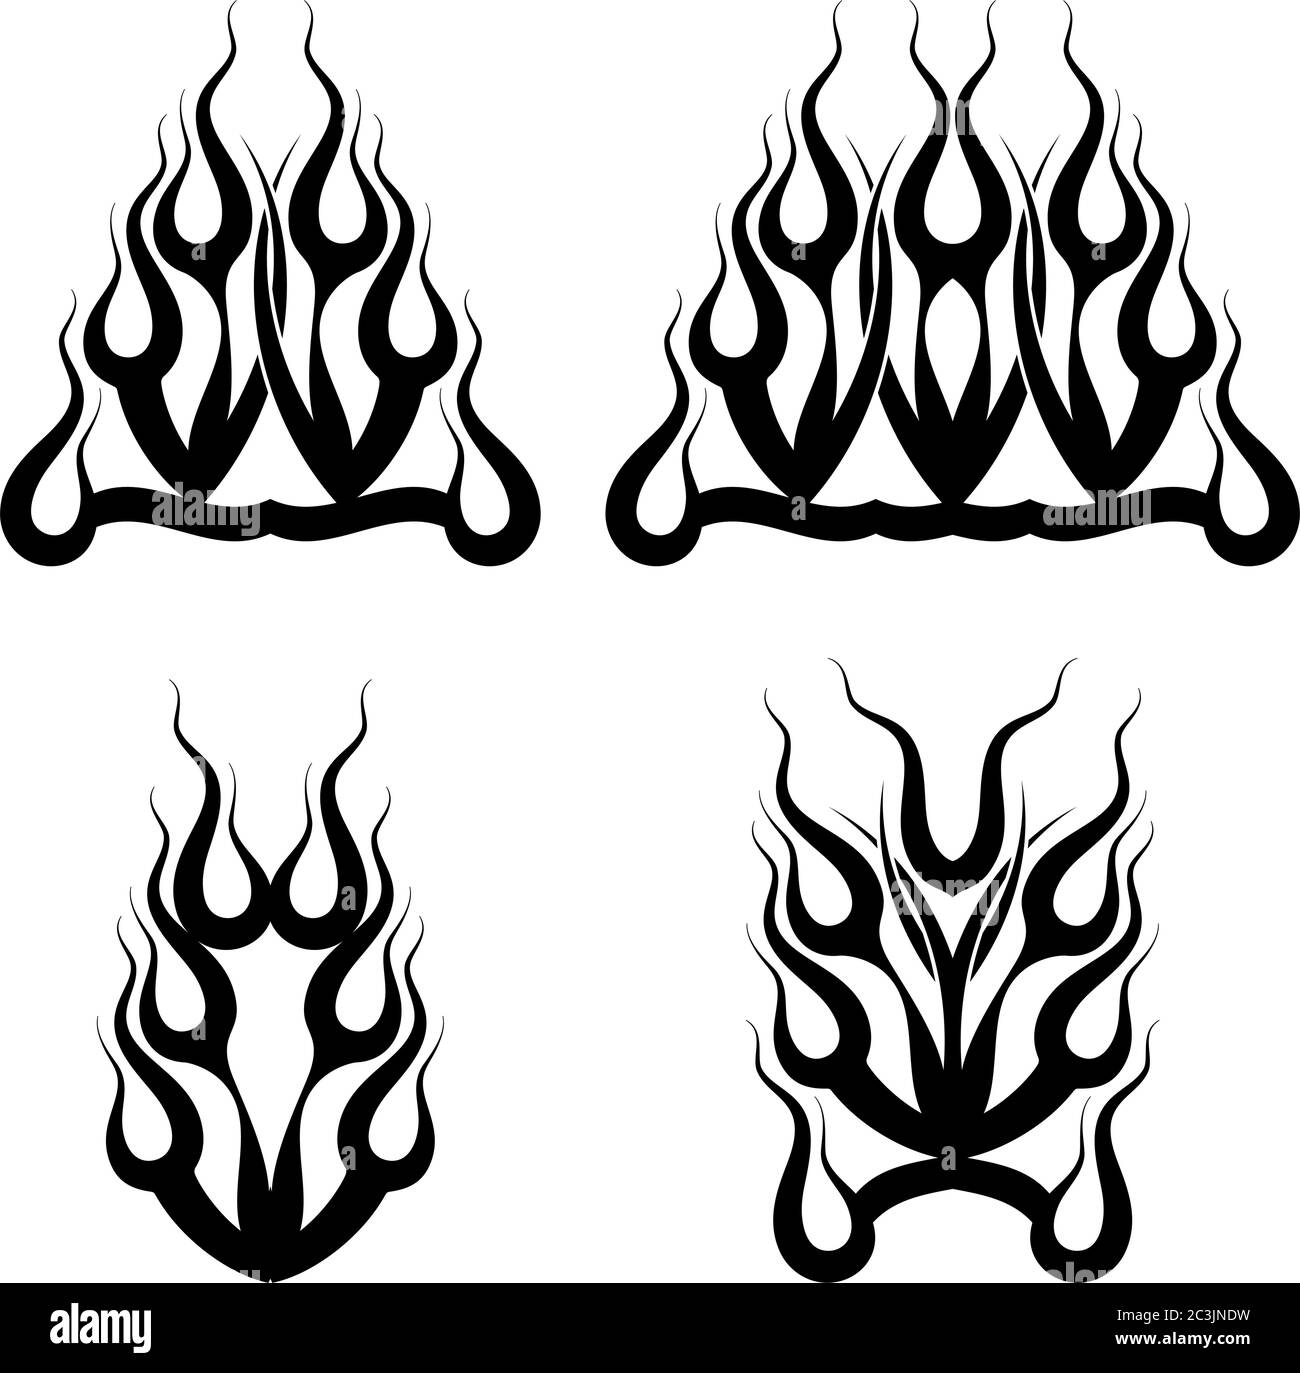 Flame tattoos A grouping of flame designs perfect for tattoos or vehicle  decoration  CanStock